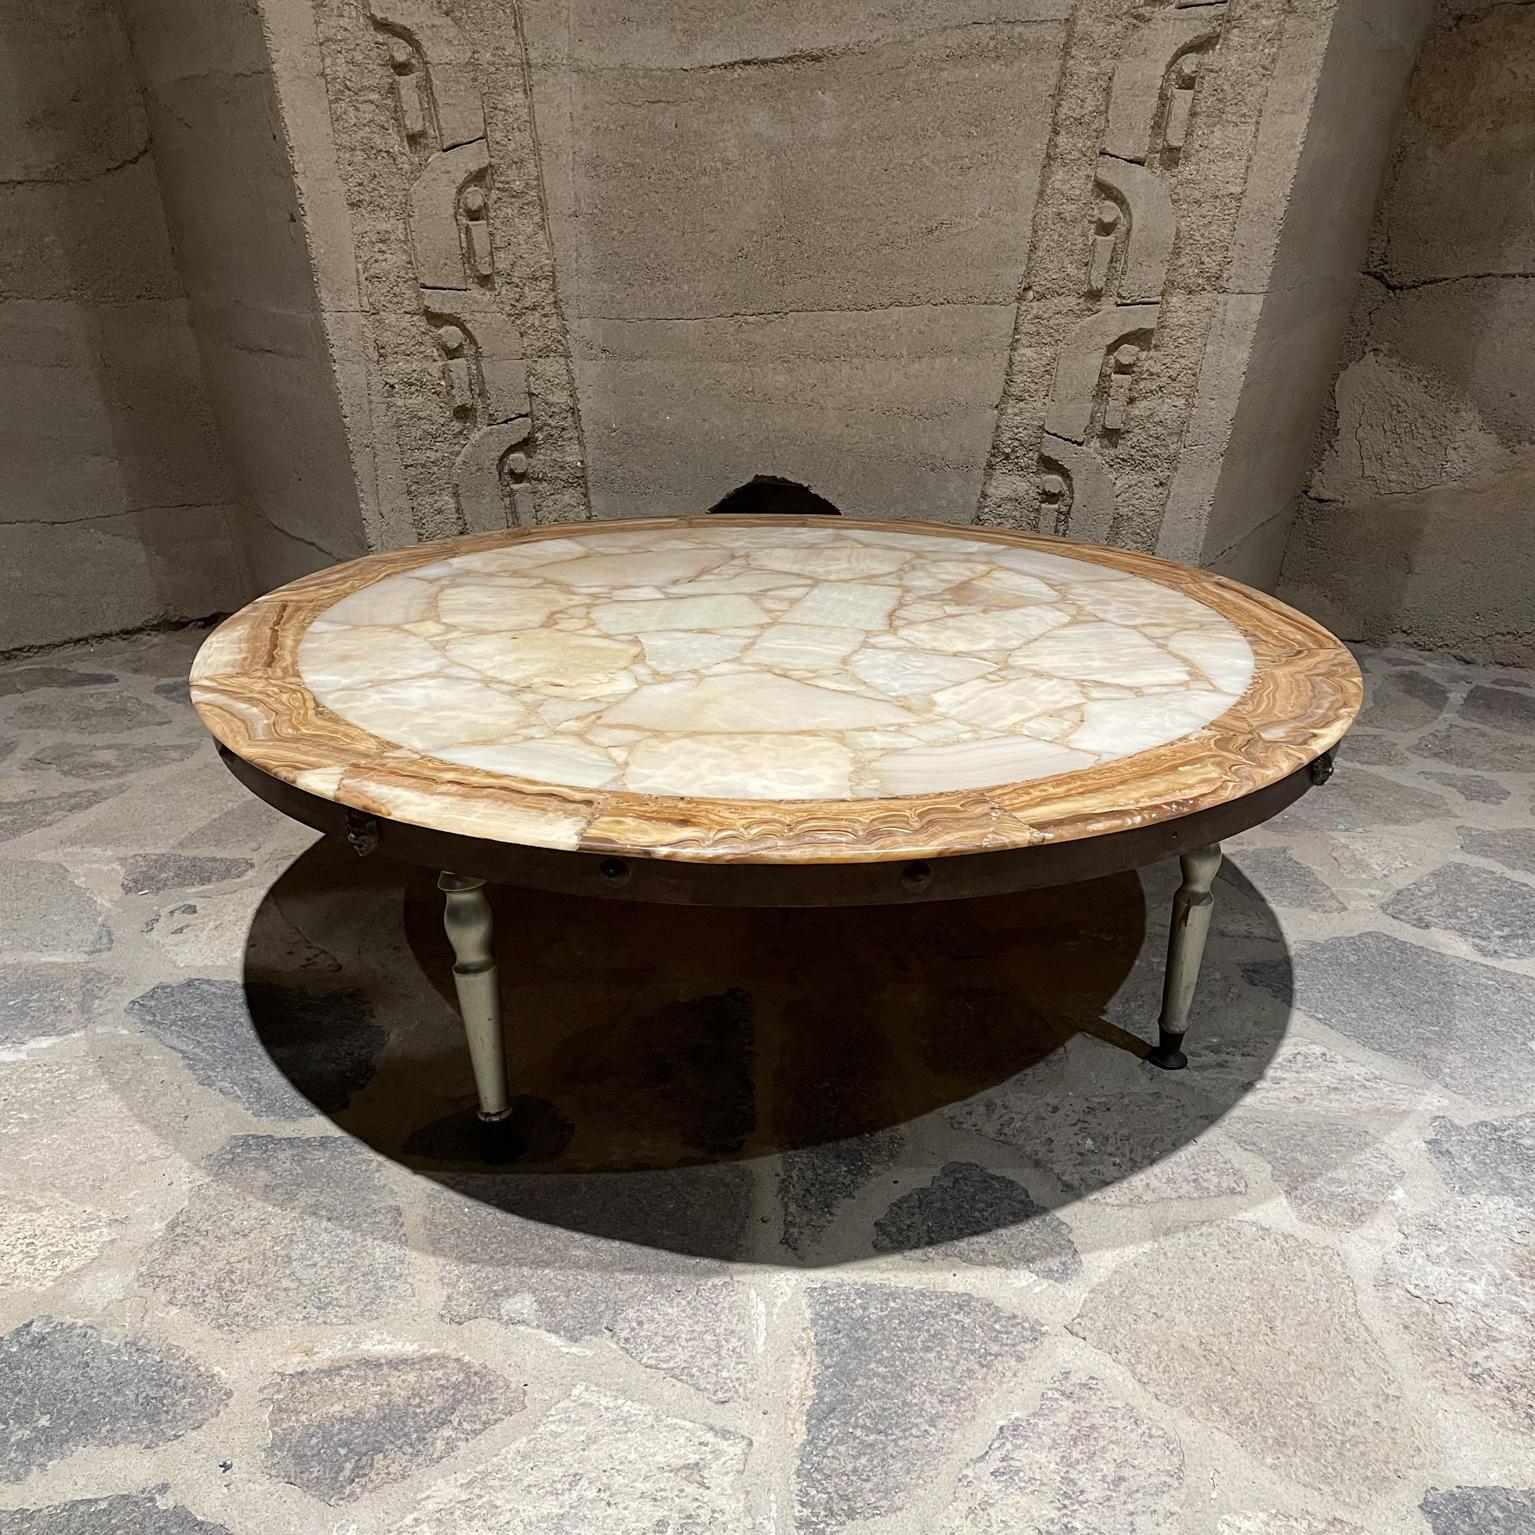 Stone coffee table
Made by Muller of Mexico Glamorous Modern round onyx stone coffee table 1960s sculpted wood legs brass sabots.
Preowned vintage condition. Tabletop has been restored, new satin finish.
Legs have patina present. Unrestored